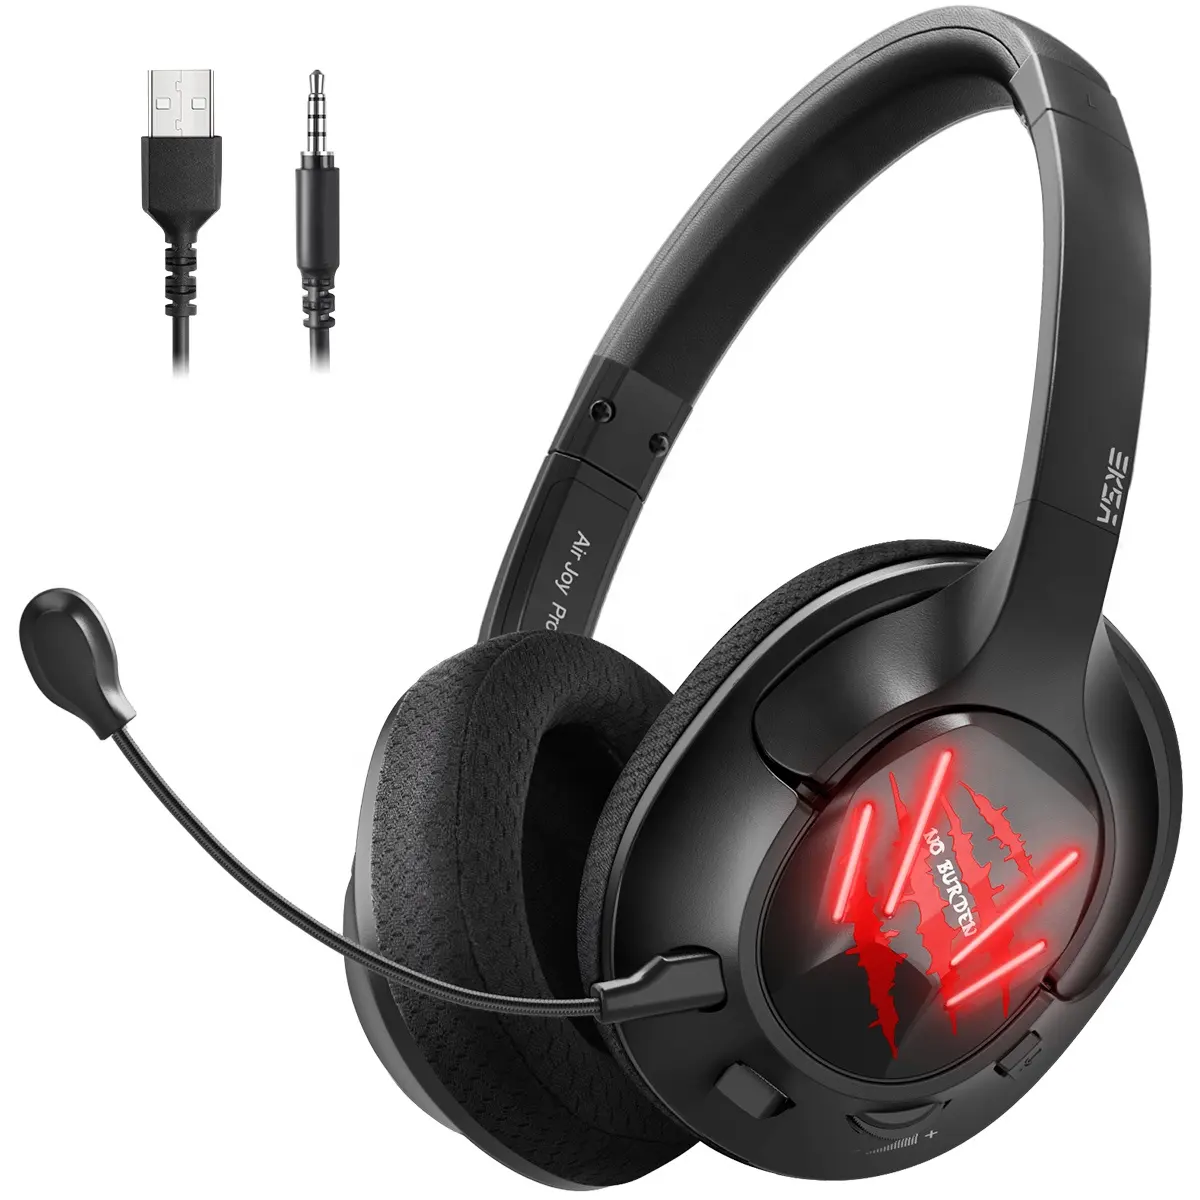 Lightest EKSA E3 Air Joy Pro Gaming Headphones 7.1 Surround Sound Over ear Gaming Headset For XBOX Switch Phone